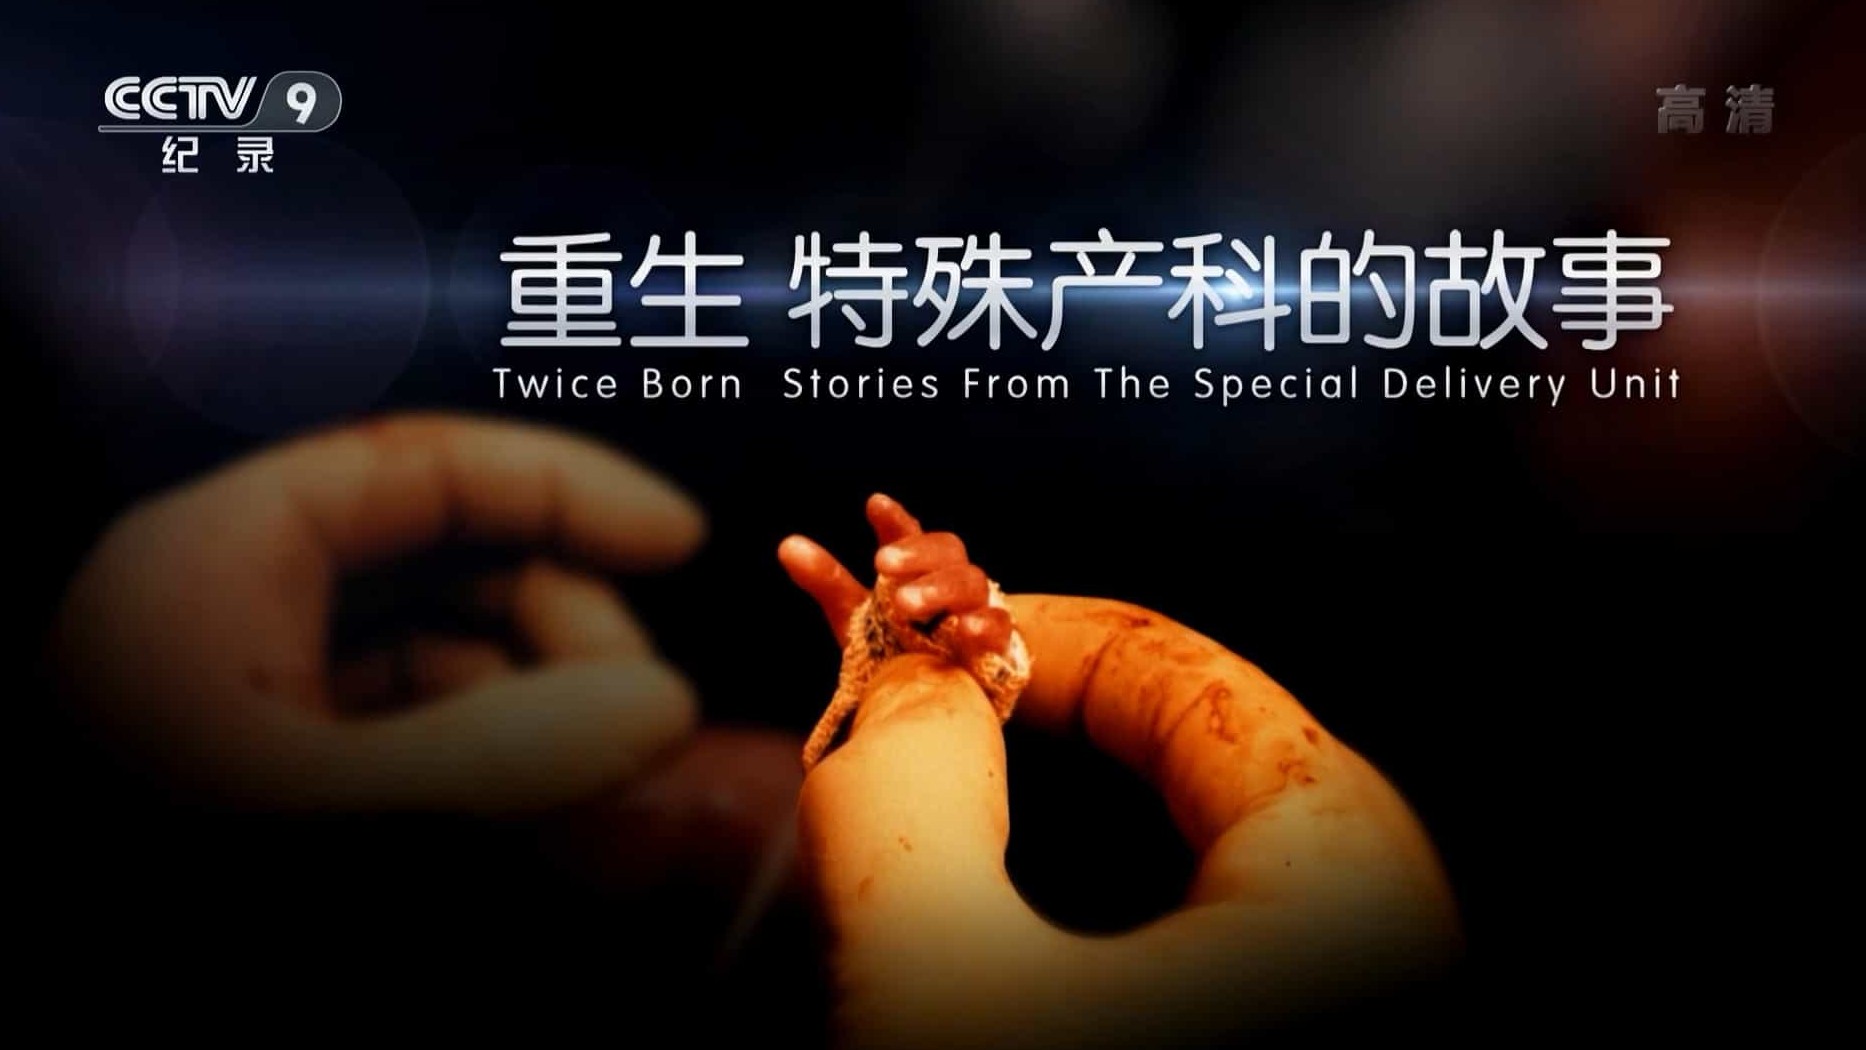 PBS纪录片《重生-特殊产科的故事 Twice Born Stories From The Special Delivery Unit 2015》全3集 国语中字 1080P高清网盘下载